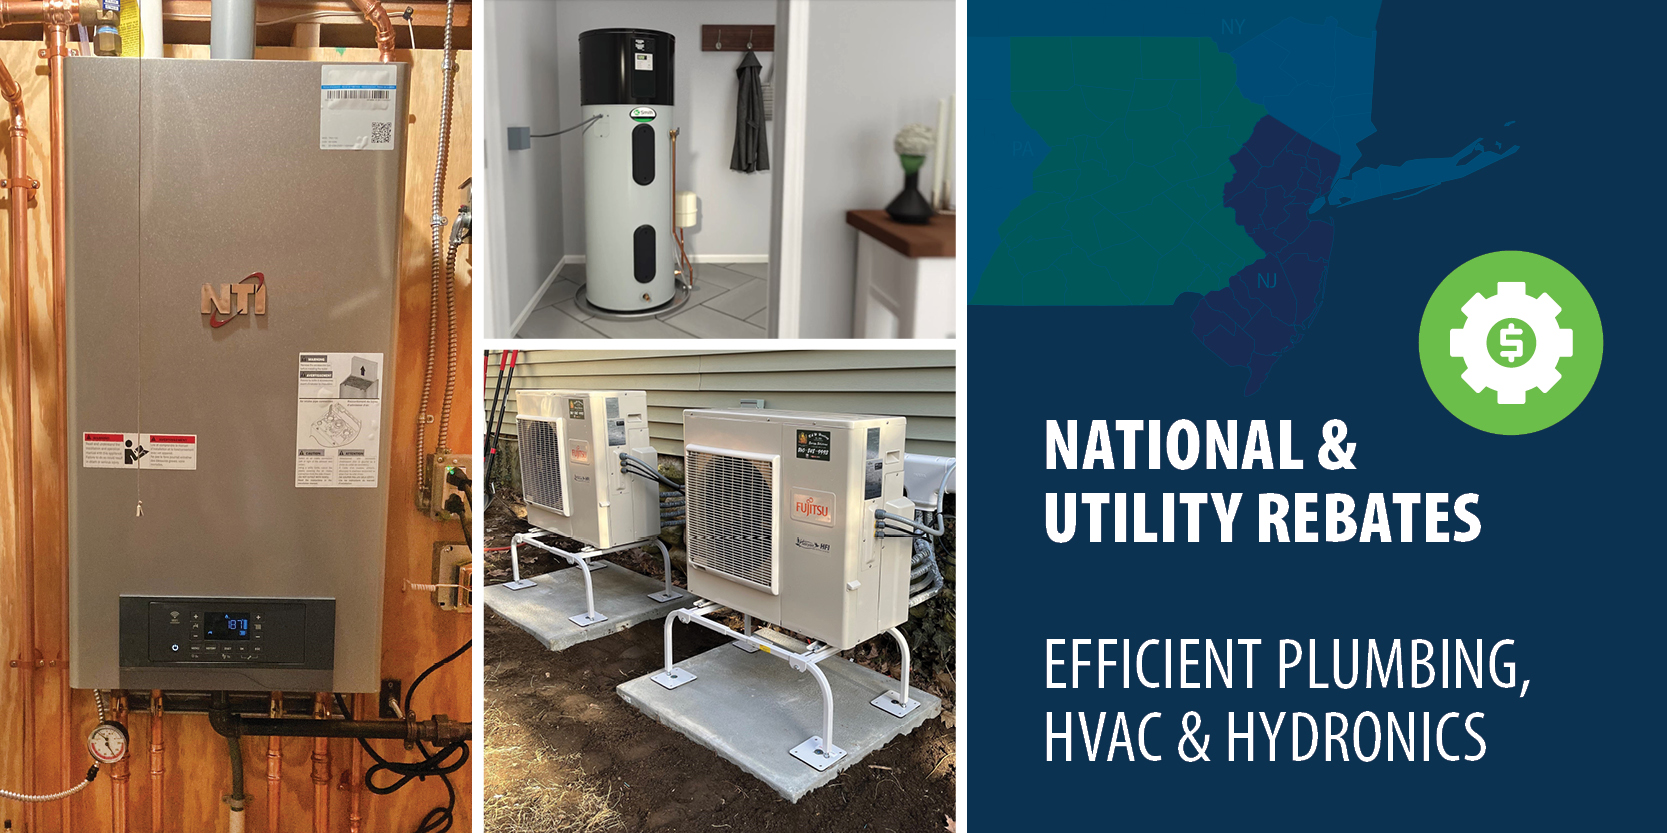 utility-rebates-national-discounts-heating-cooling-hot-water